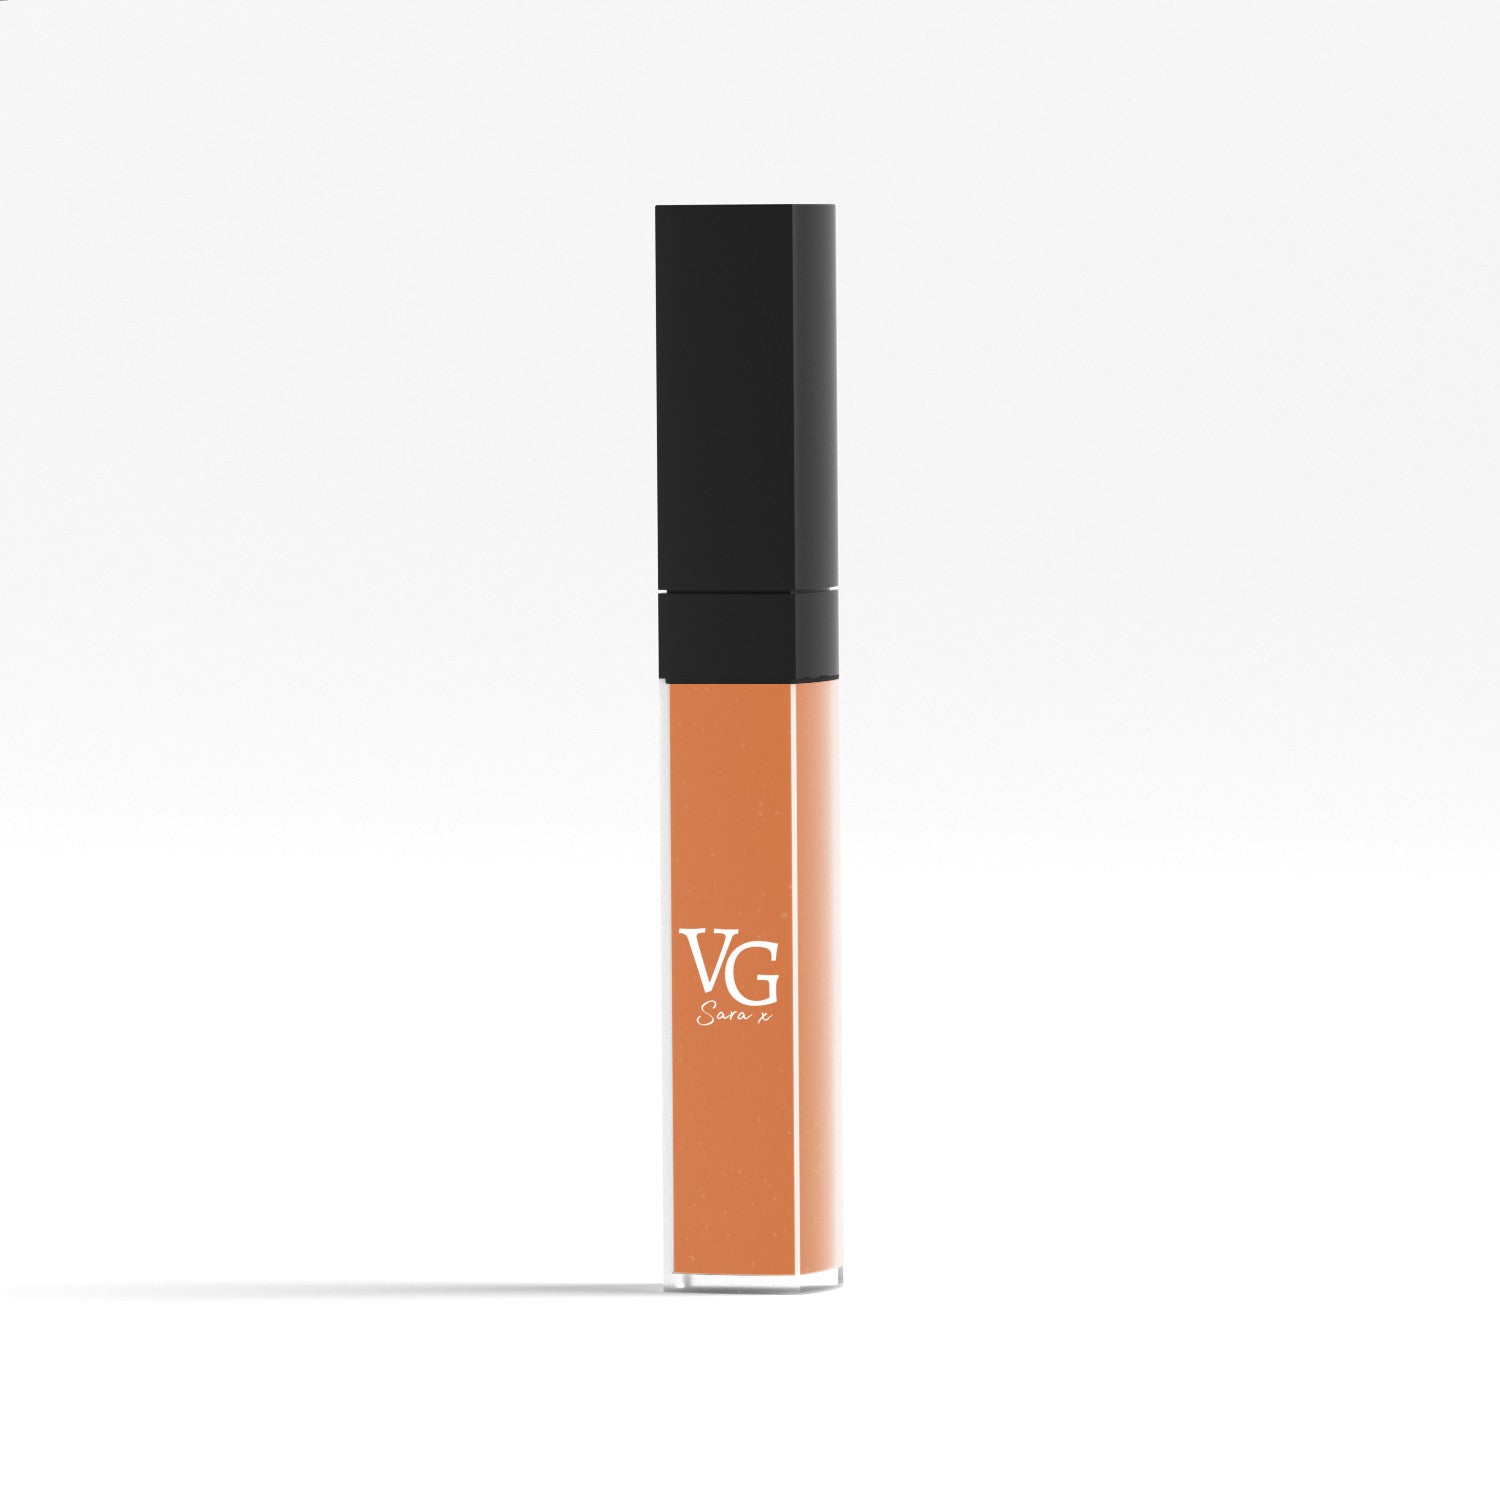 Coral shade liquid in a transparent lip container with logo